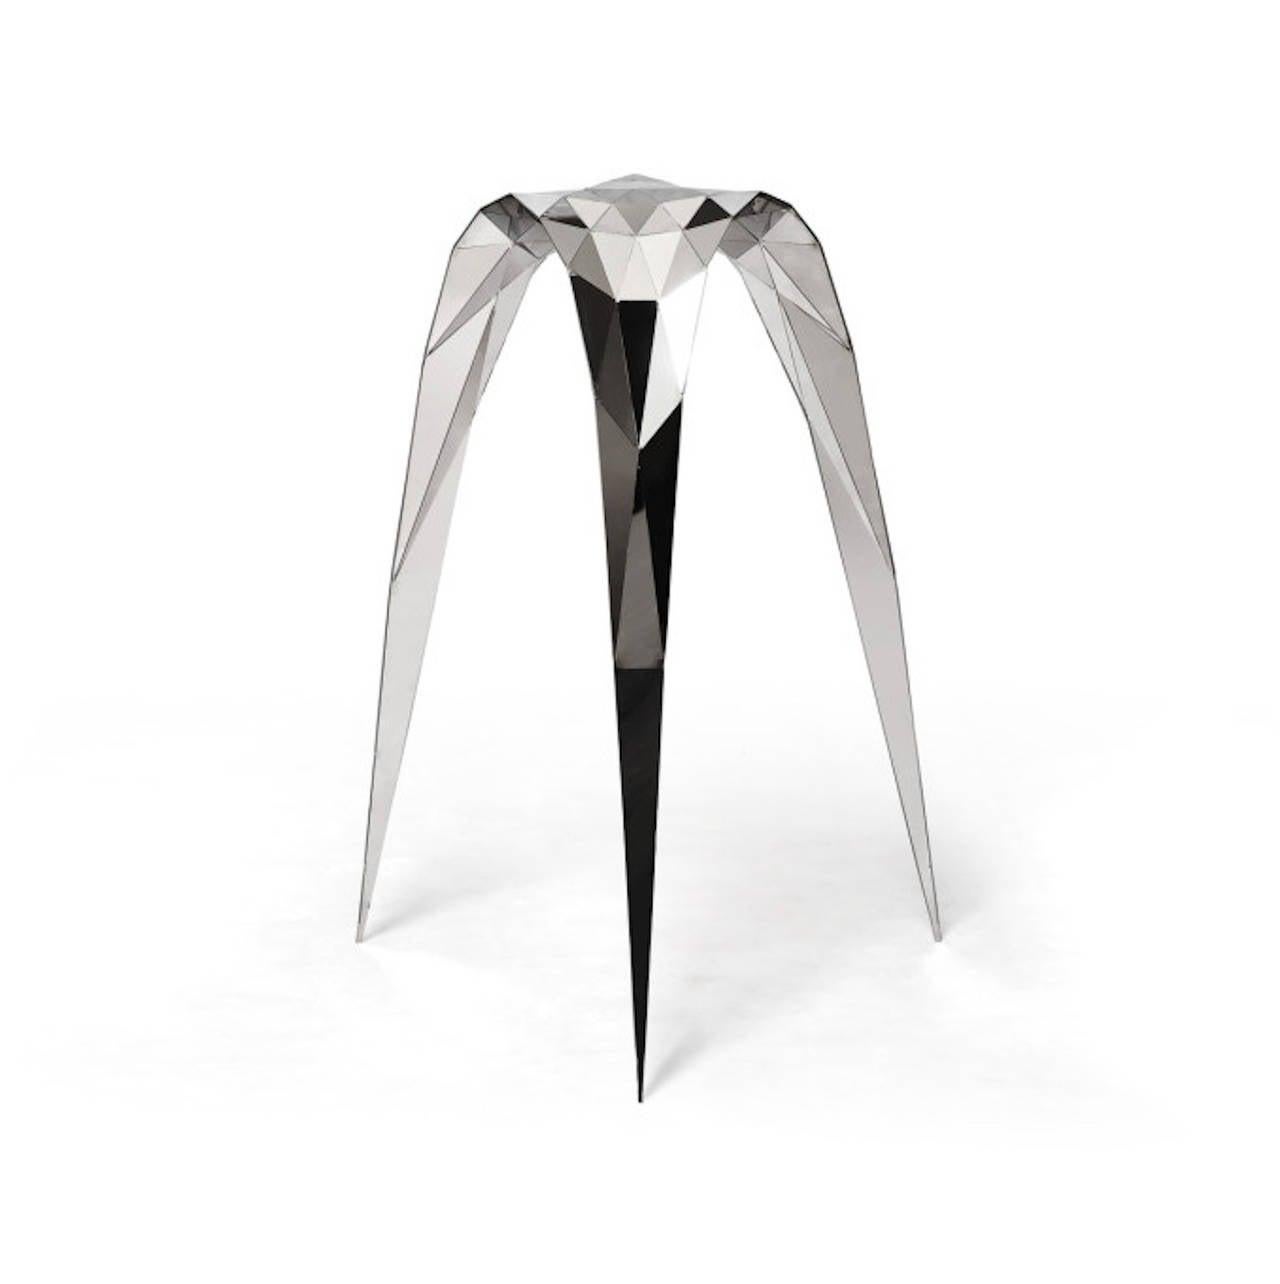 The elegantly arched triangle stool was created using handmade digital crafts, the same fabrication techniques devised in Zhoujie’s digital laboratory. The stool’s digital roots lend an architectural and minimal aesthetic not commonly found at this